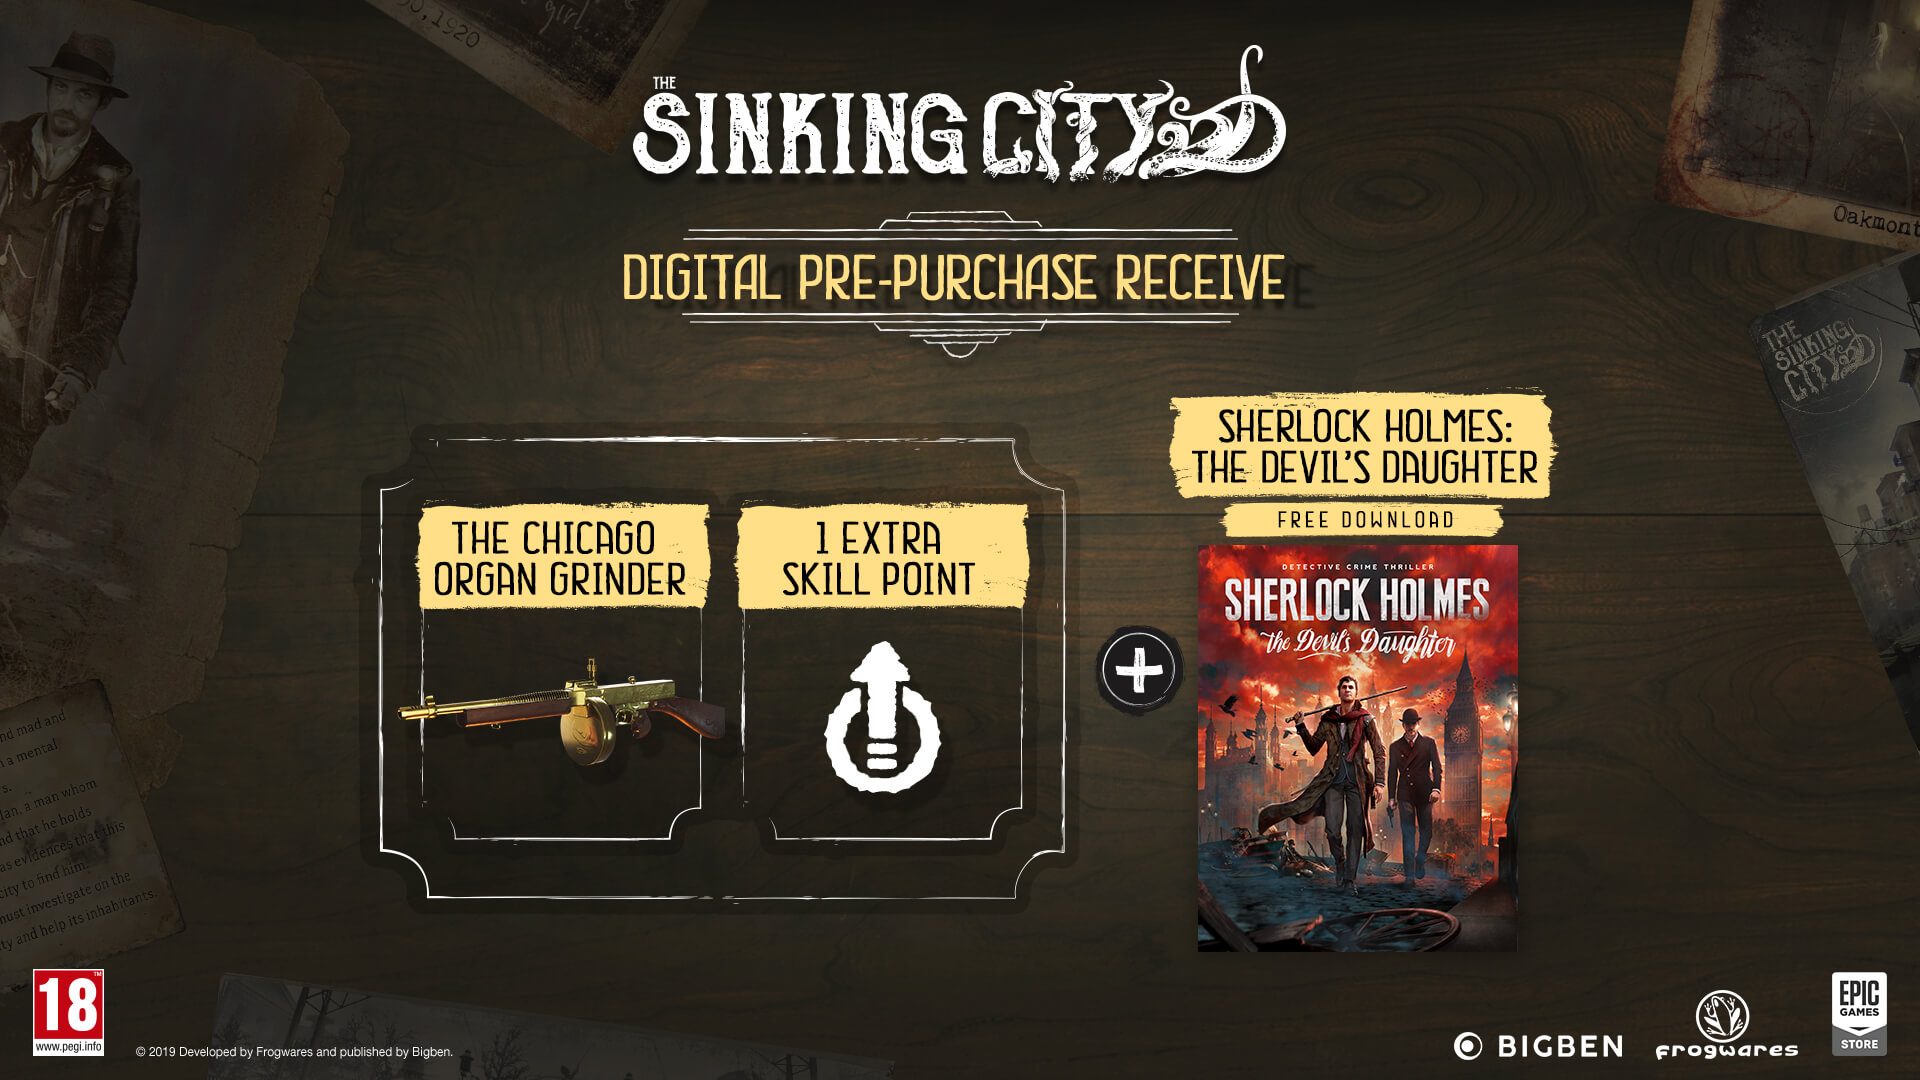 the sinking city day one edition ps4